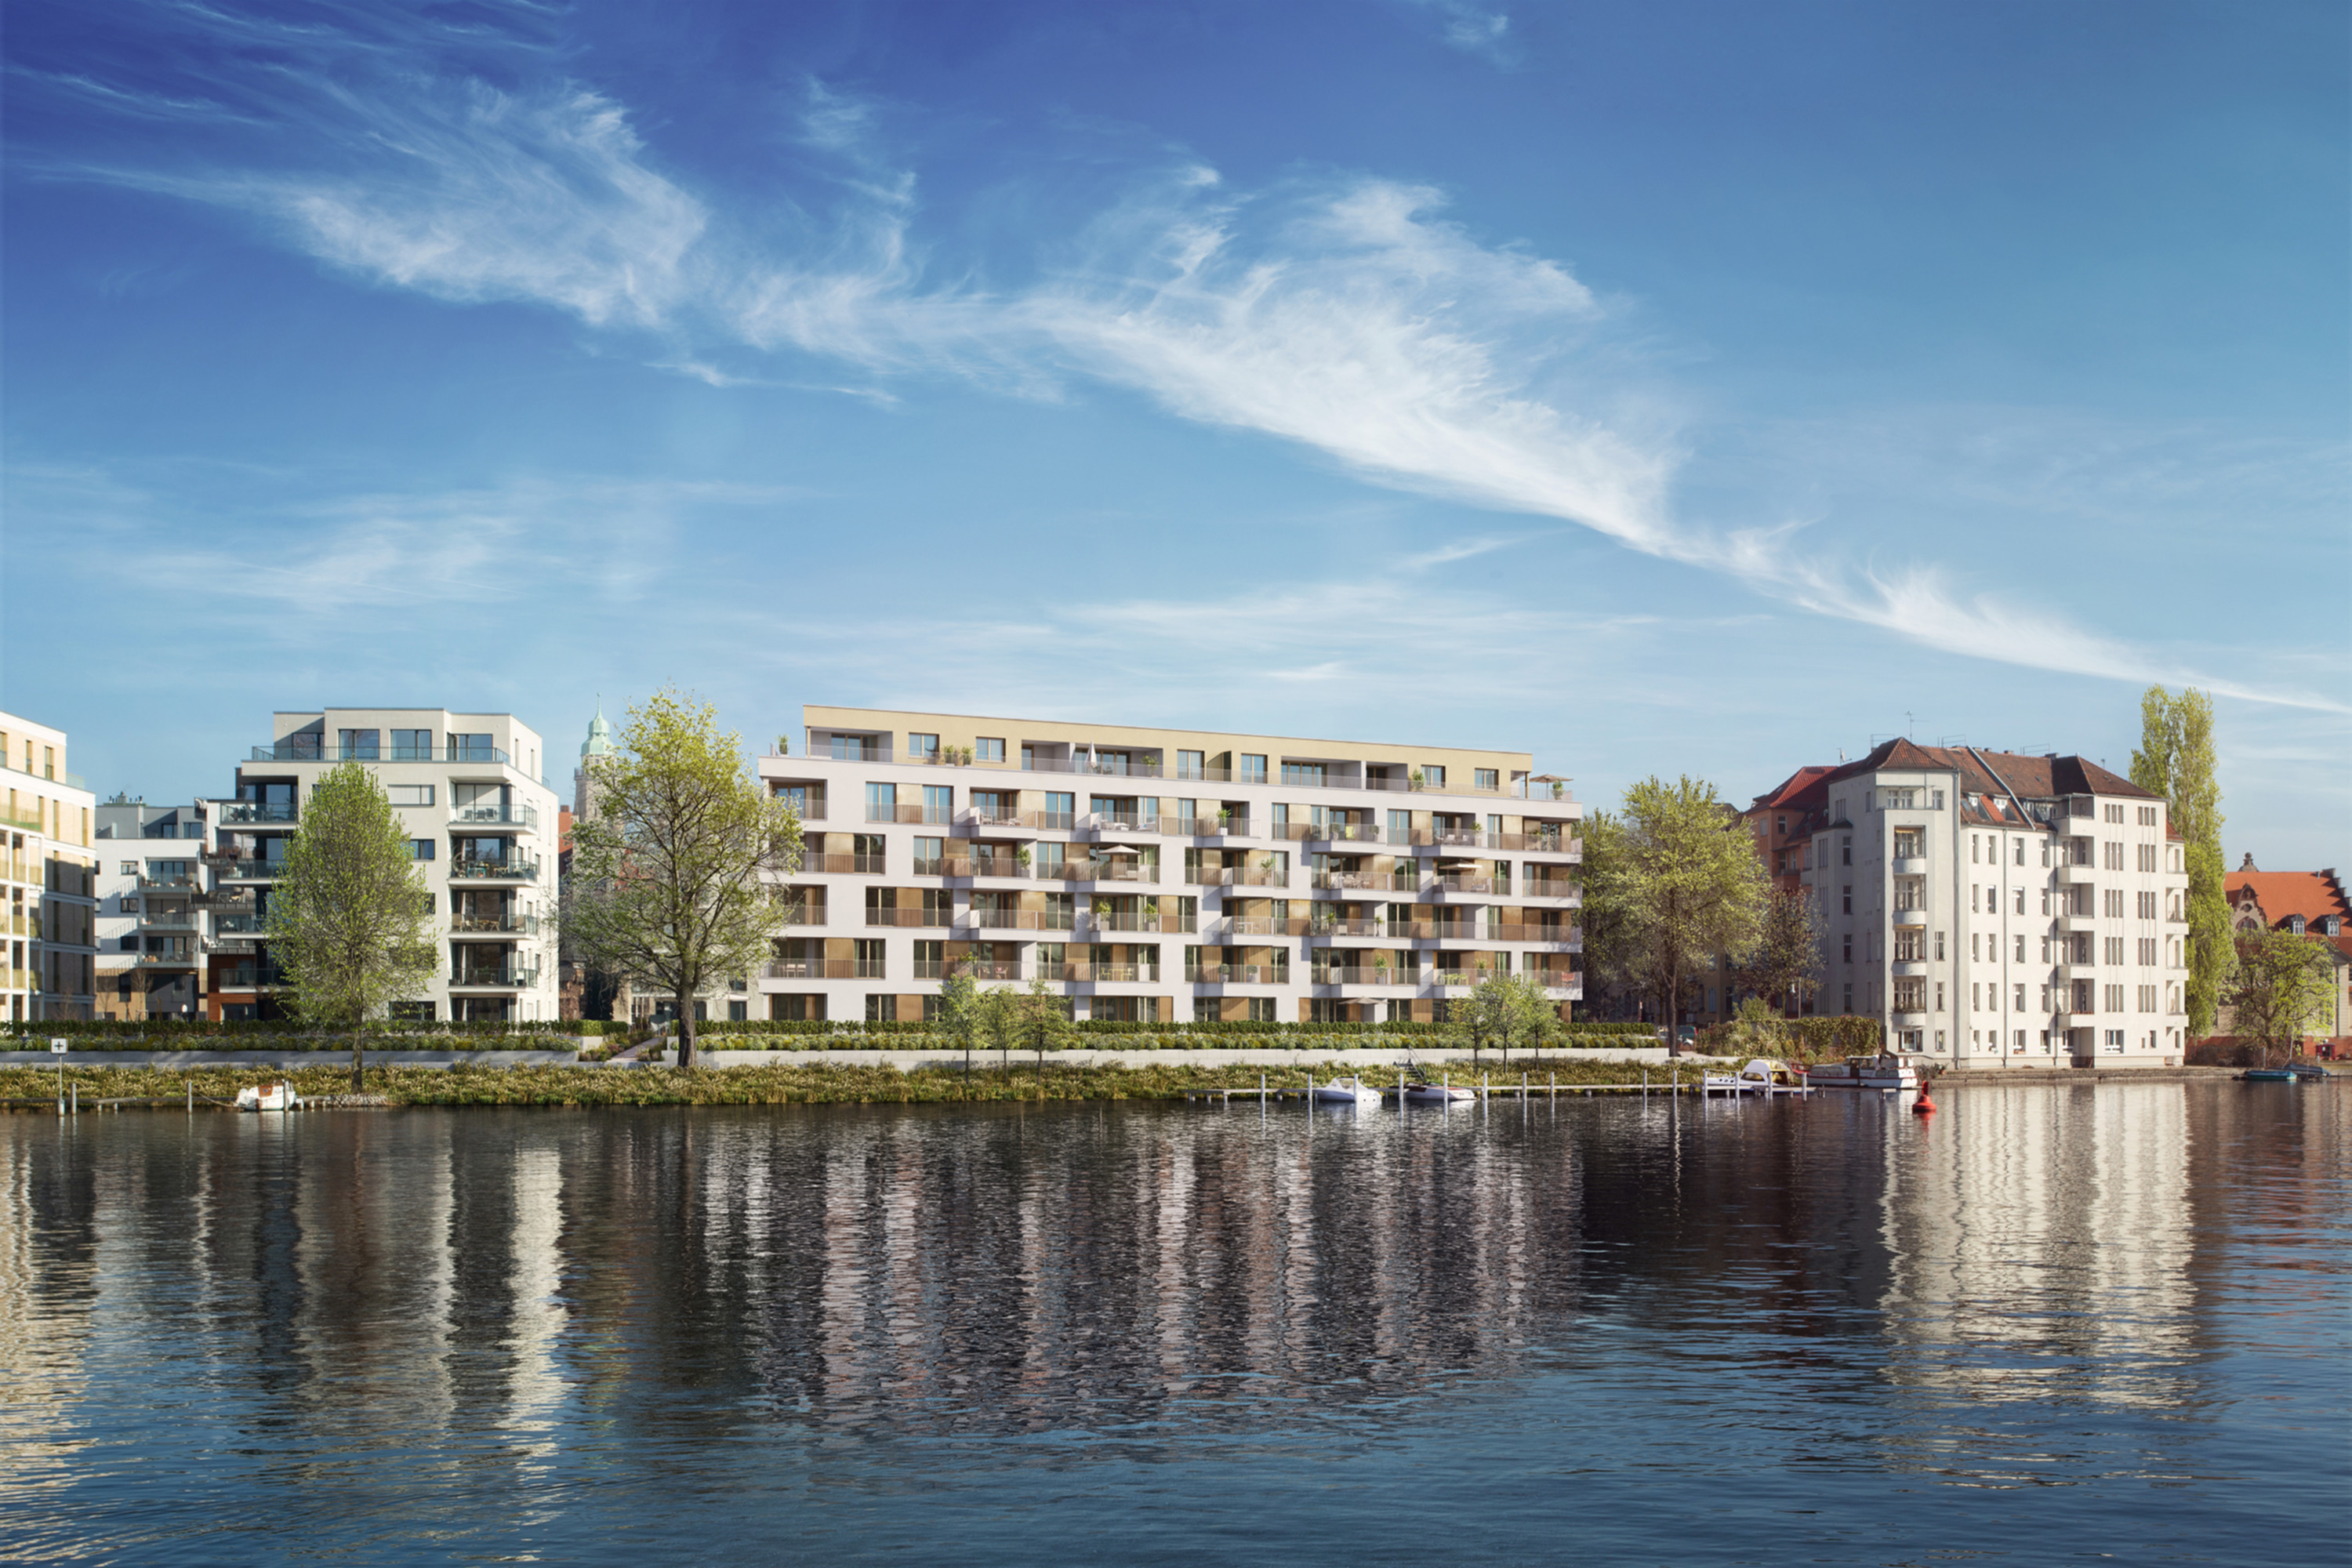 Visualization of the new building Uferkrone Suno on the banks of the river Spree